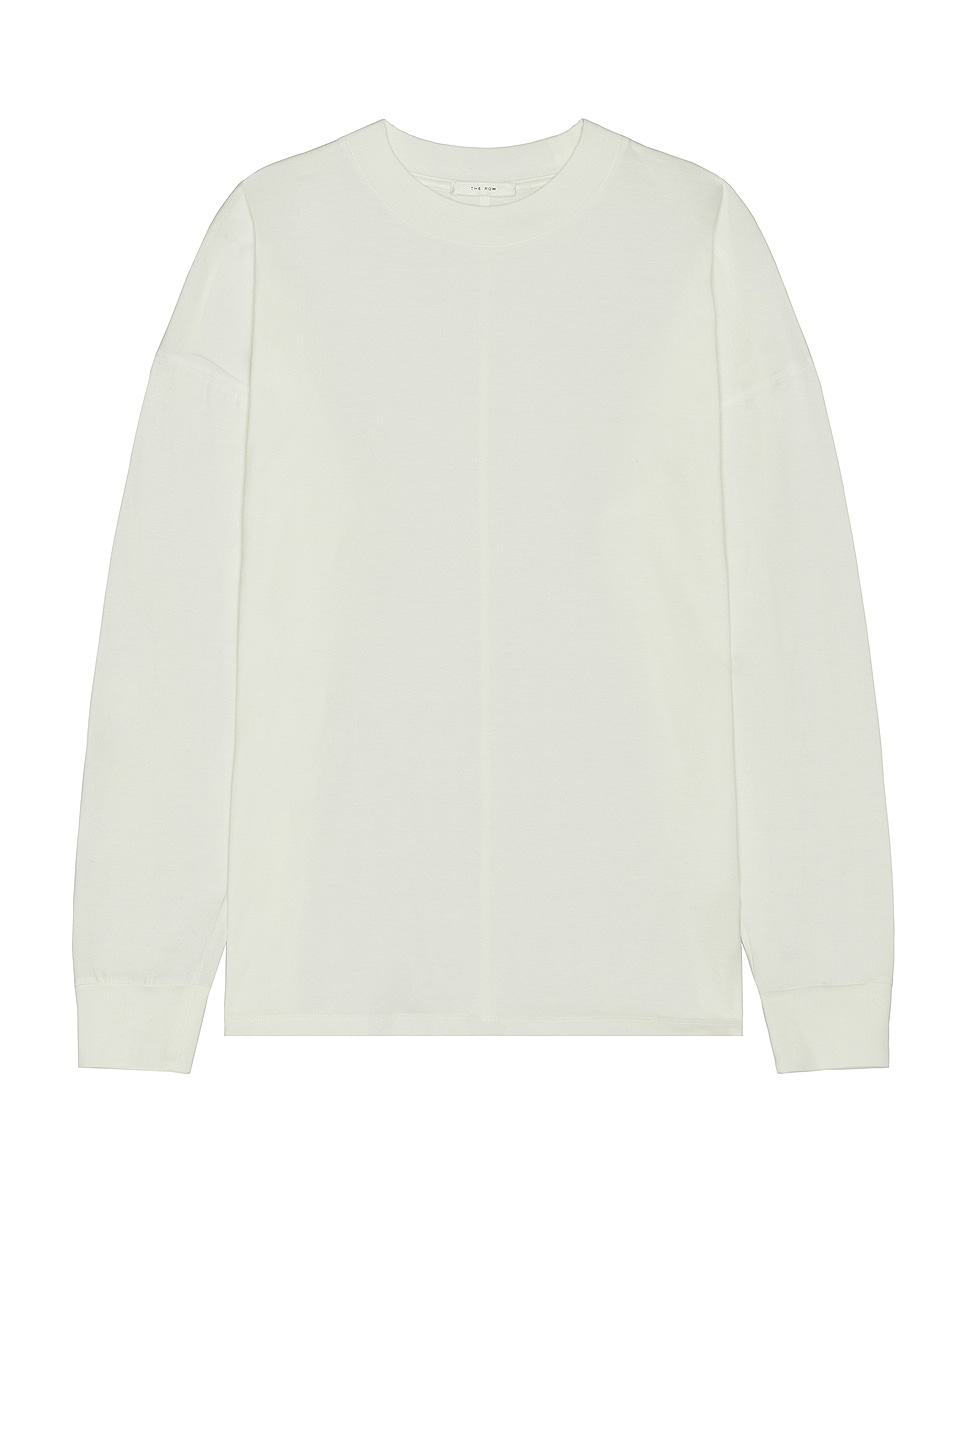 Image 1 of The Row Drago Top in White